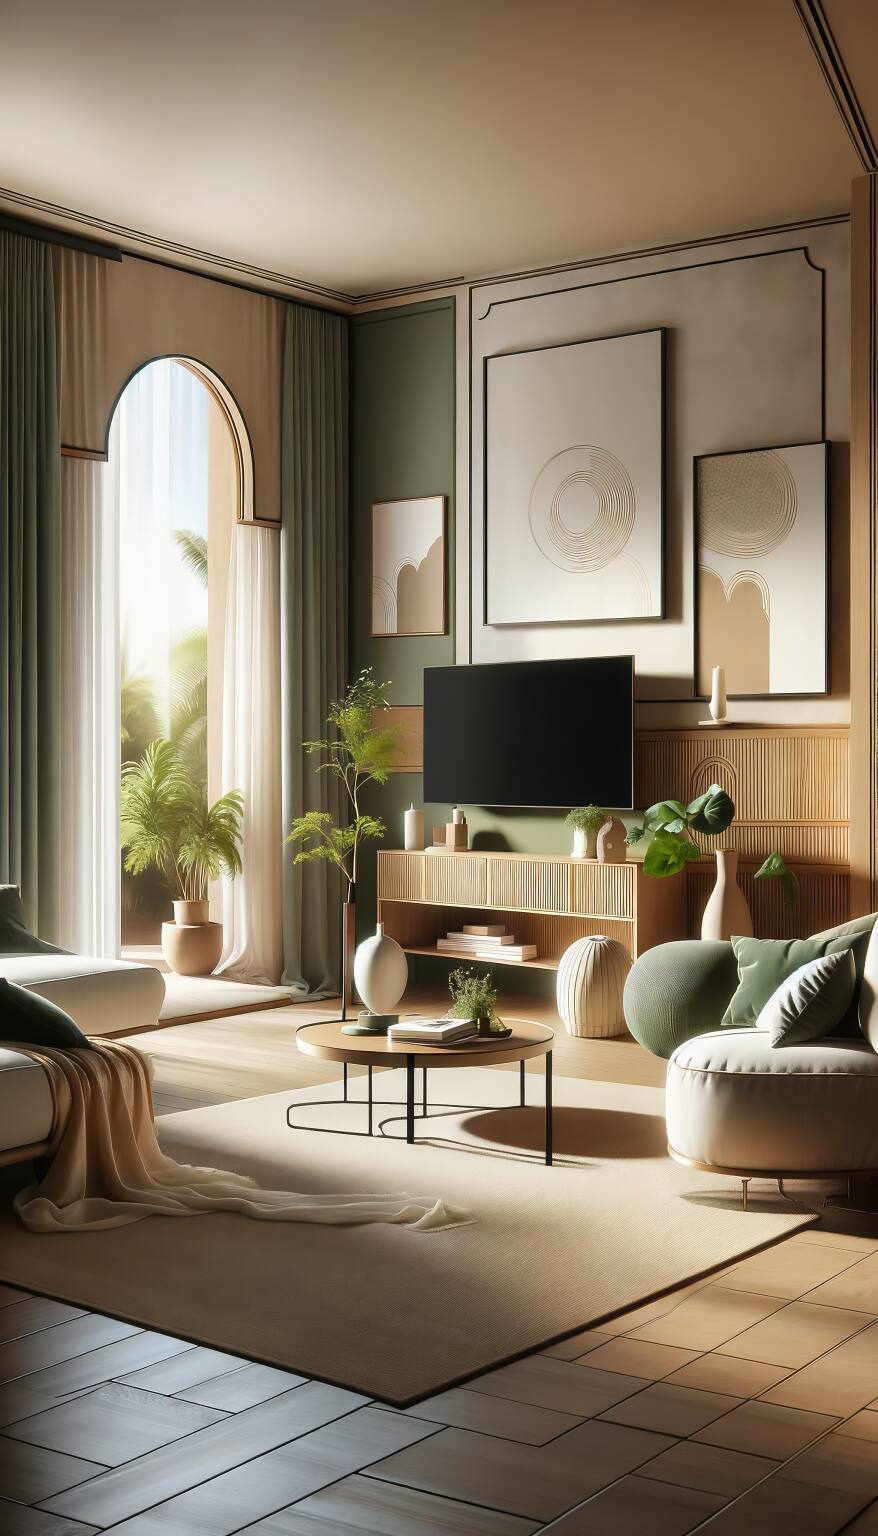 A Modern Romantic Living Room Combining Earthy Beige And Soft Green Tones, Featuring A Contemporary Sofa, Minimalist Coffee Table, And A Modern Flat-Screen Tv, Creating A Tranquil, Sophisticated Space.